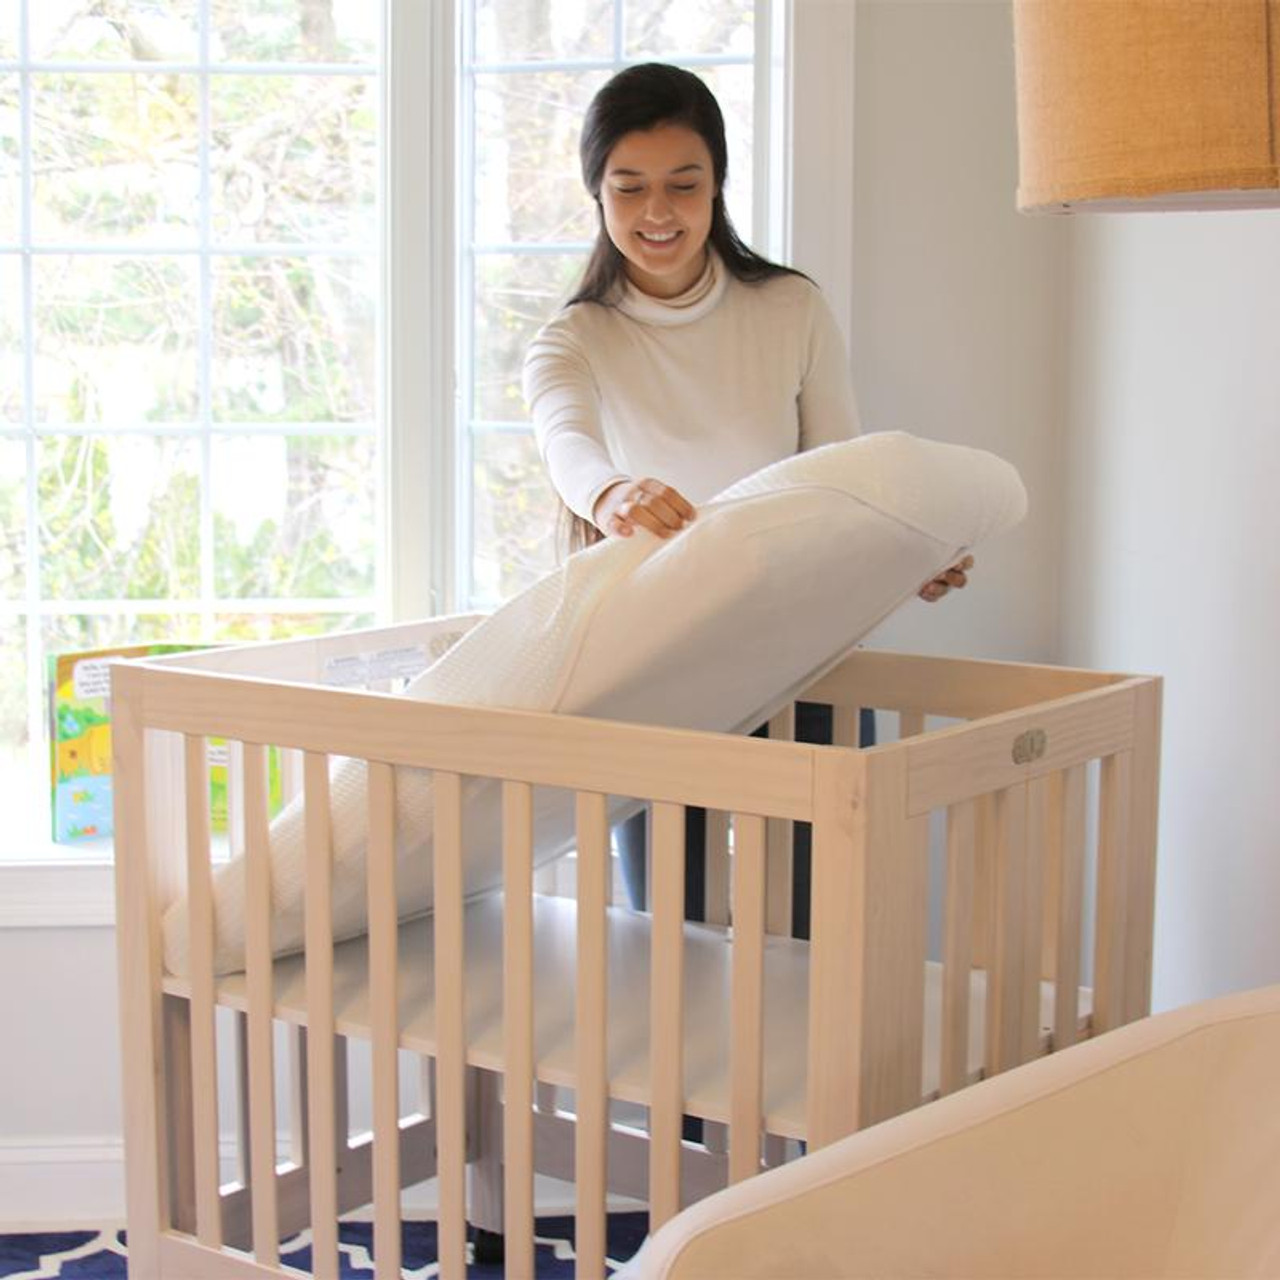 Lullaby Earth Breathe Safe Air Breathable Mattress Pad